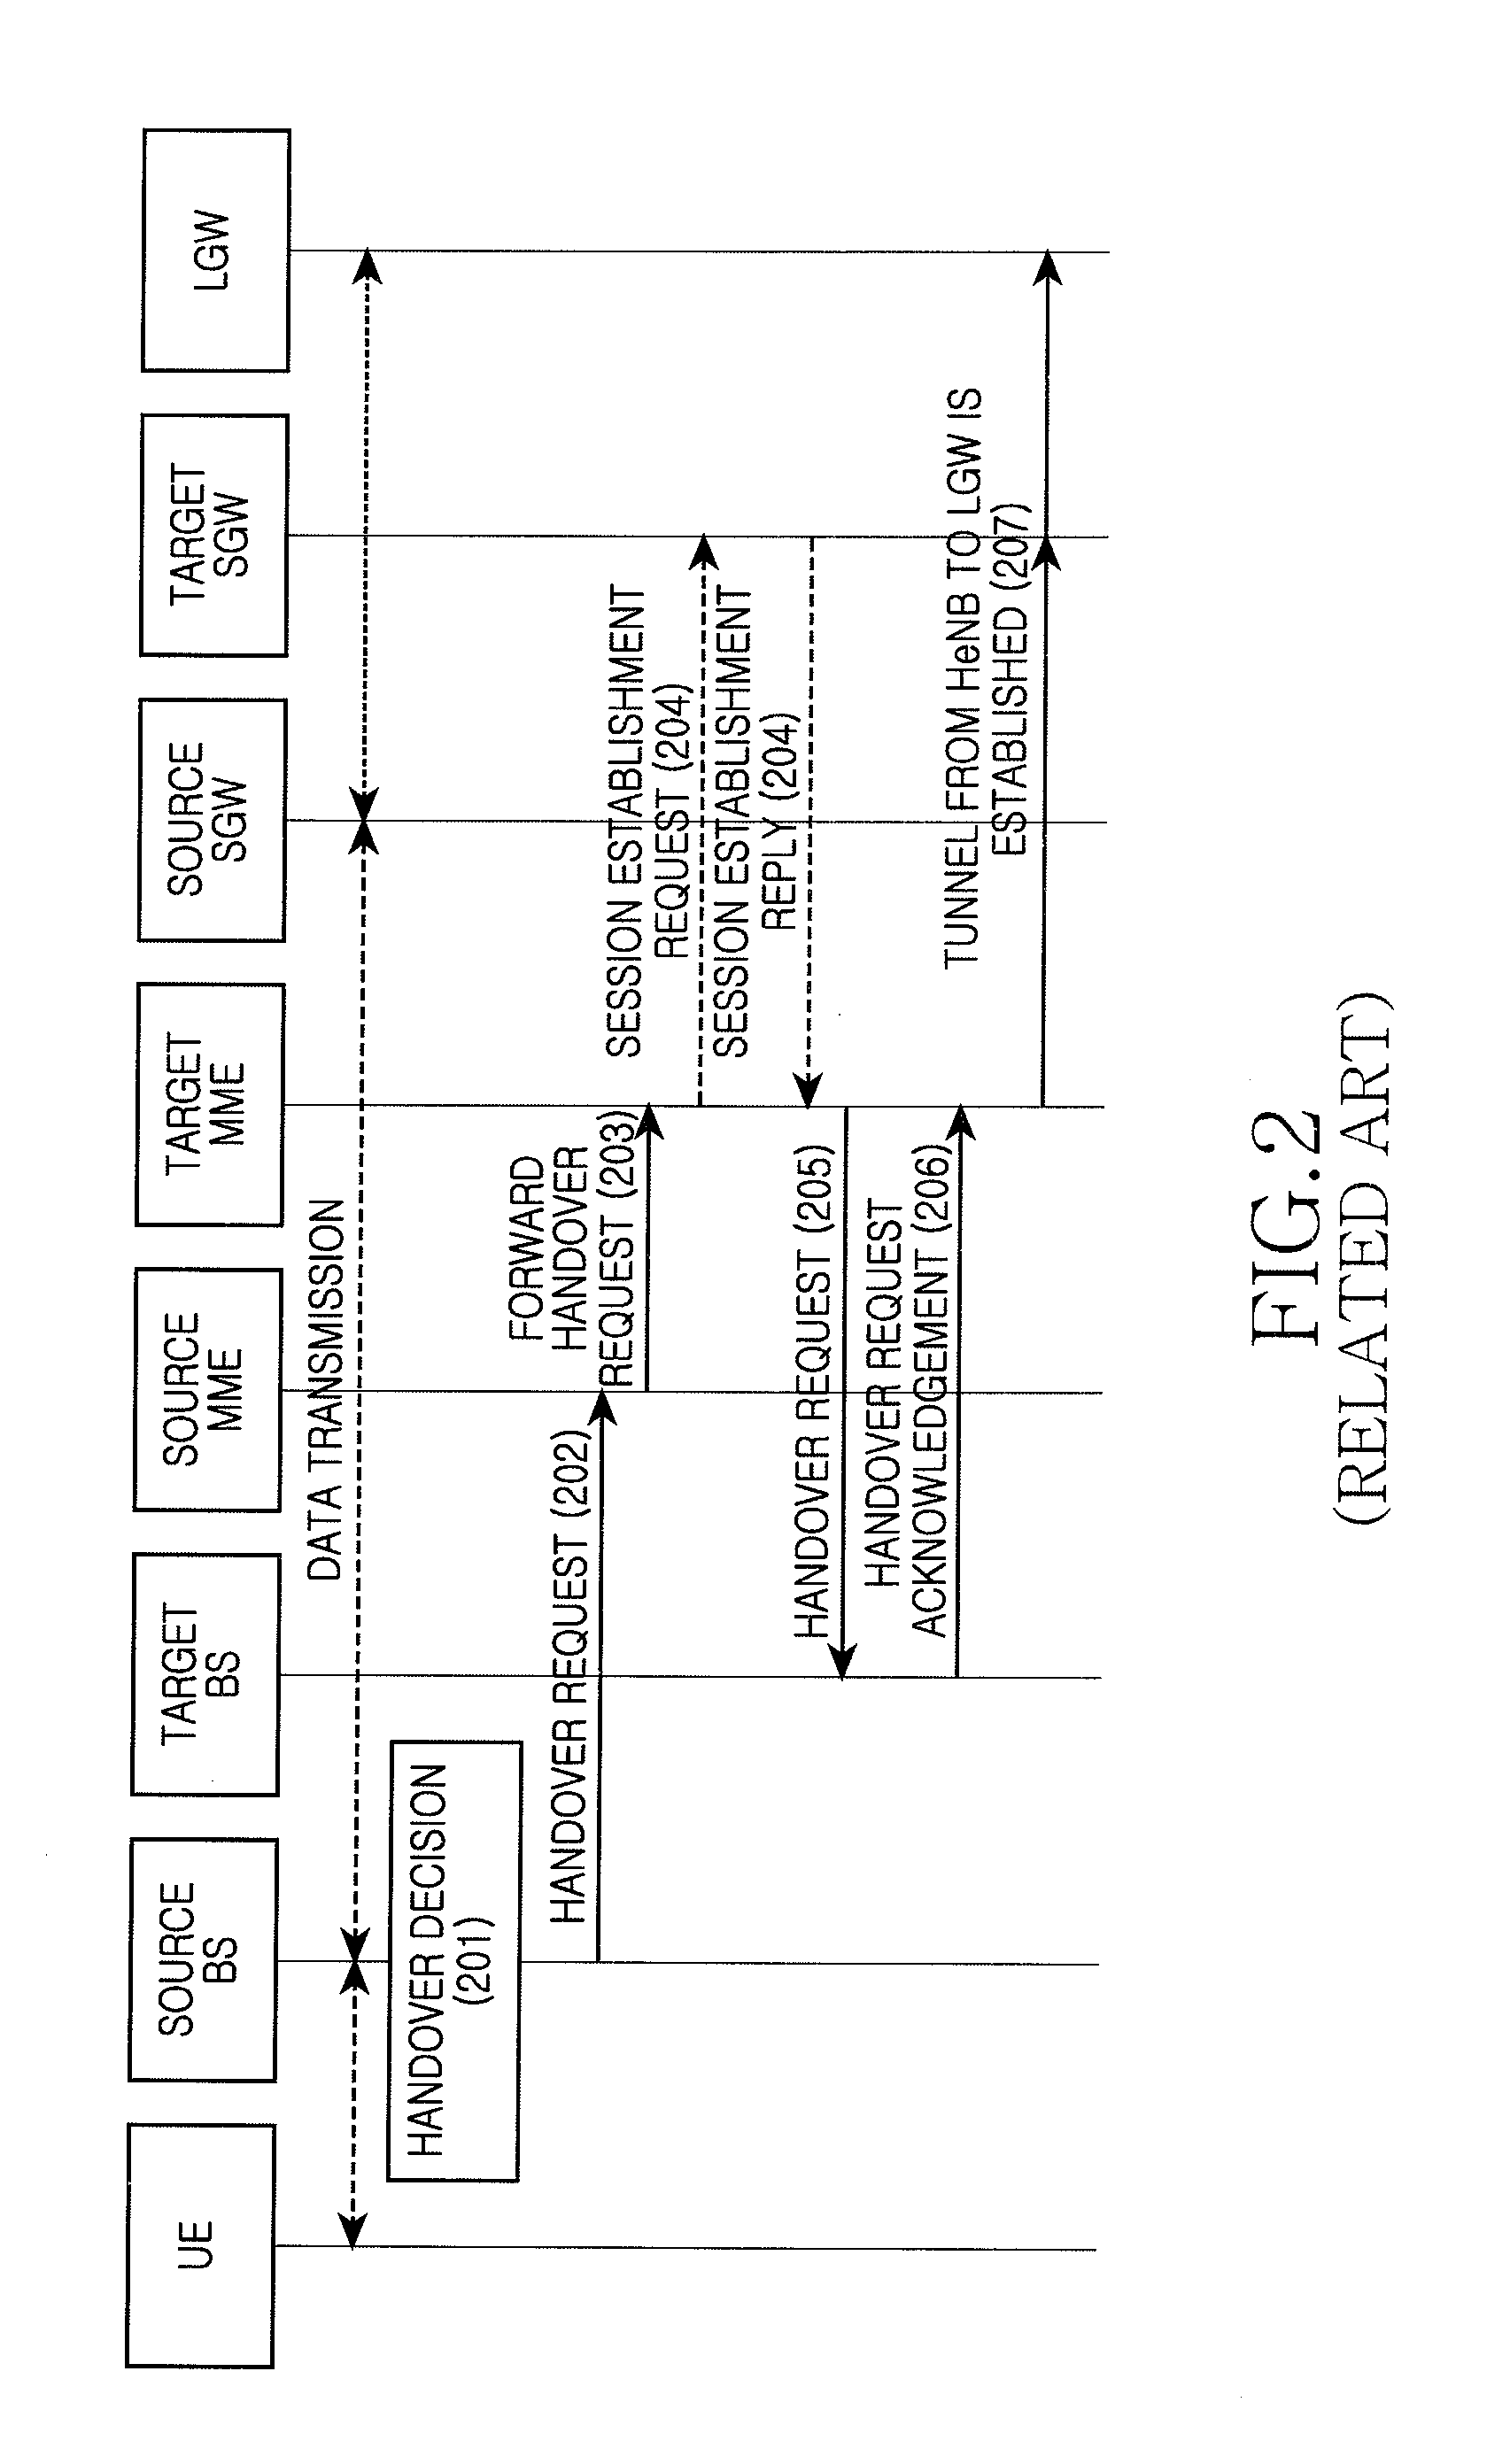 Handover method supporting terminal mobility